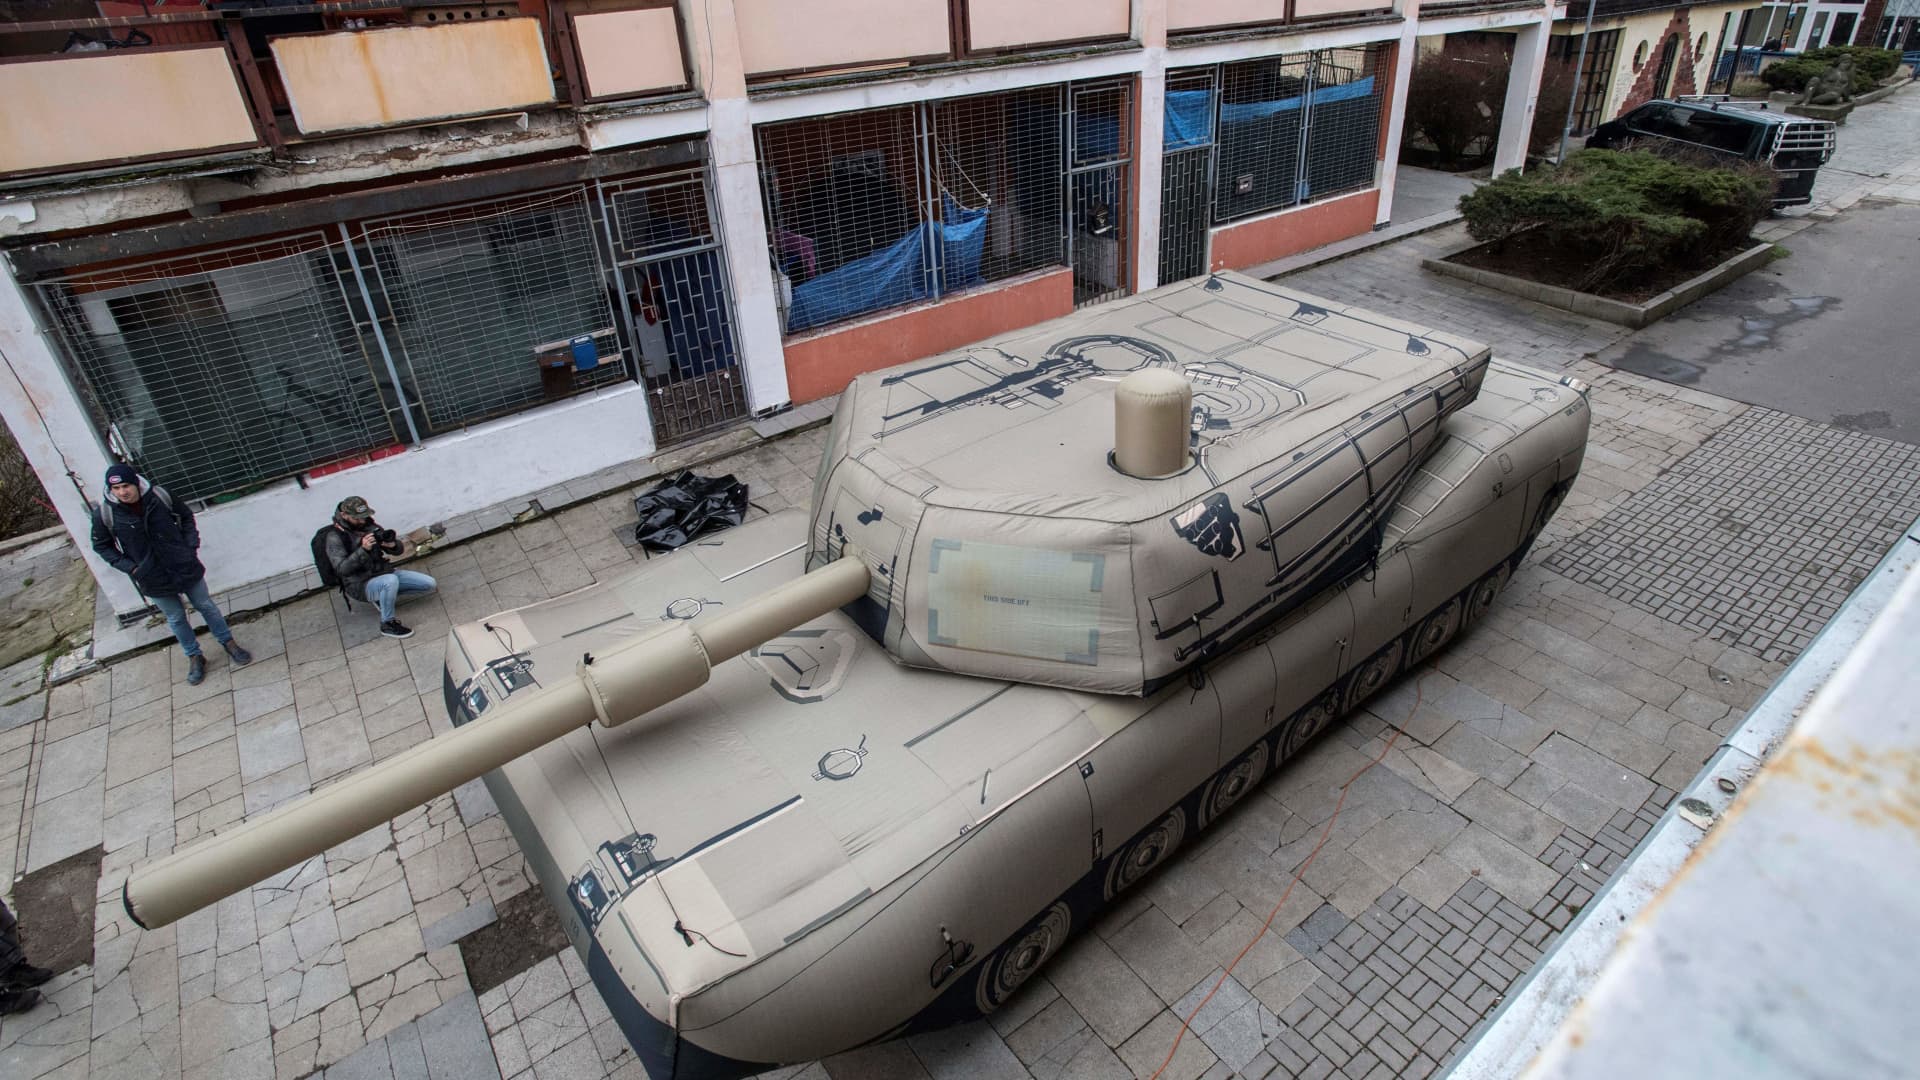 An inflatable decoy of an M1 Abrams tank is displayed during a media presentation in Decin, Czech Republic on March 6, 2023. - A Czech company producing inflatable weapon decoys such as Himars rocket launchers has seen profits soar since the Russian invasion of Ukraine started last year, its officials said on March 6. The Inflatech company based in the northern Czech city of Decin and founded eight years ago makes more than 30 types of inflatable weapons. (Photo by Michal Cizek / AFP) (Photo by MICHAL CIZEK/AFP via Getty Images)